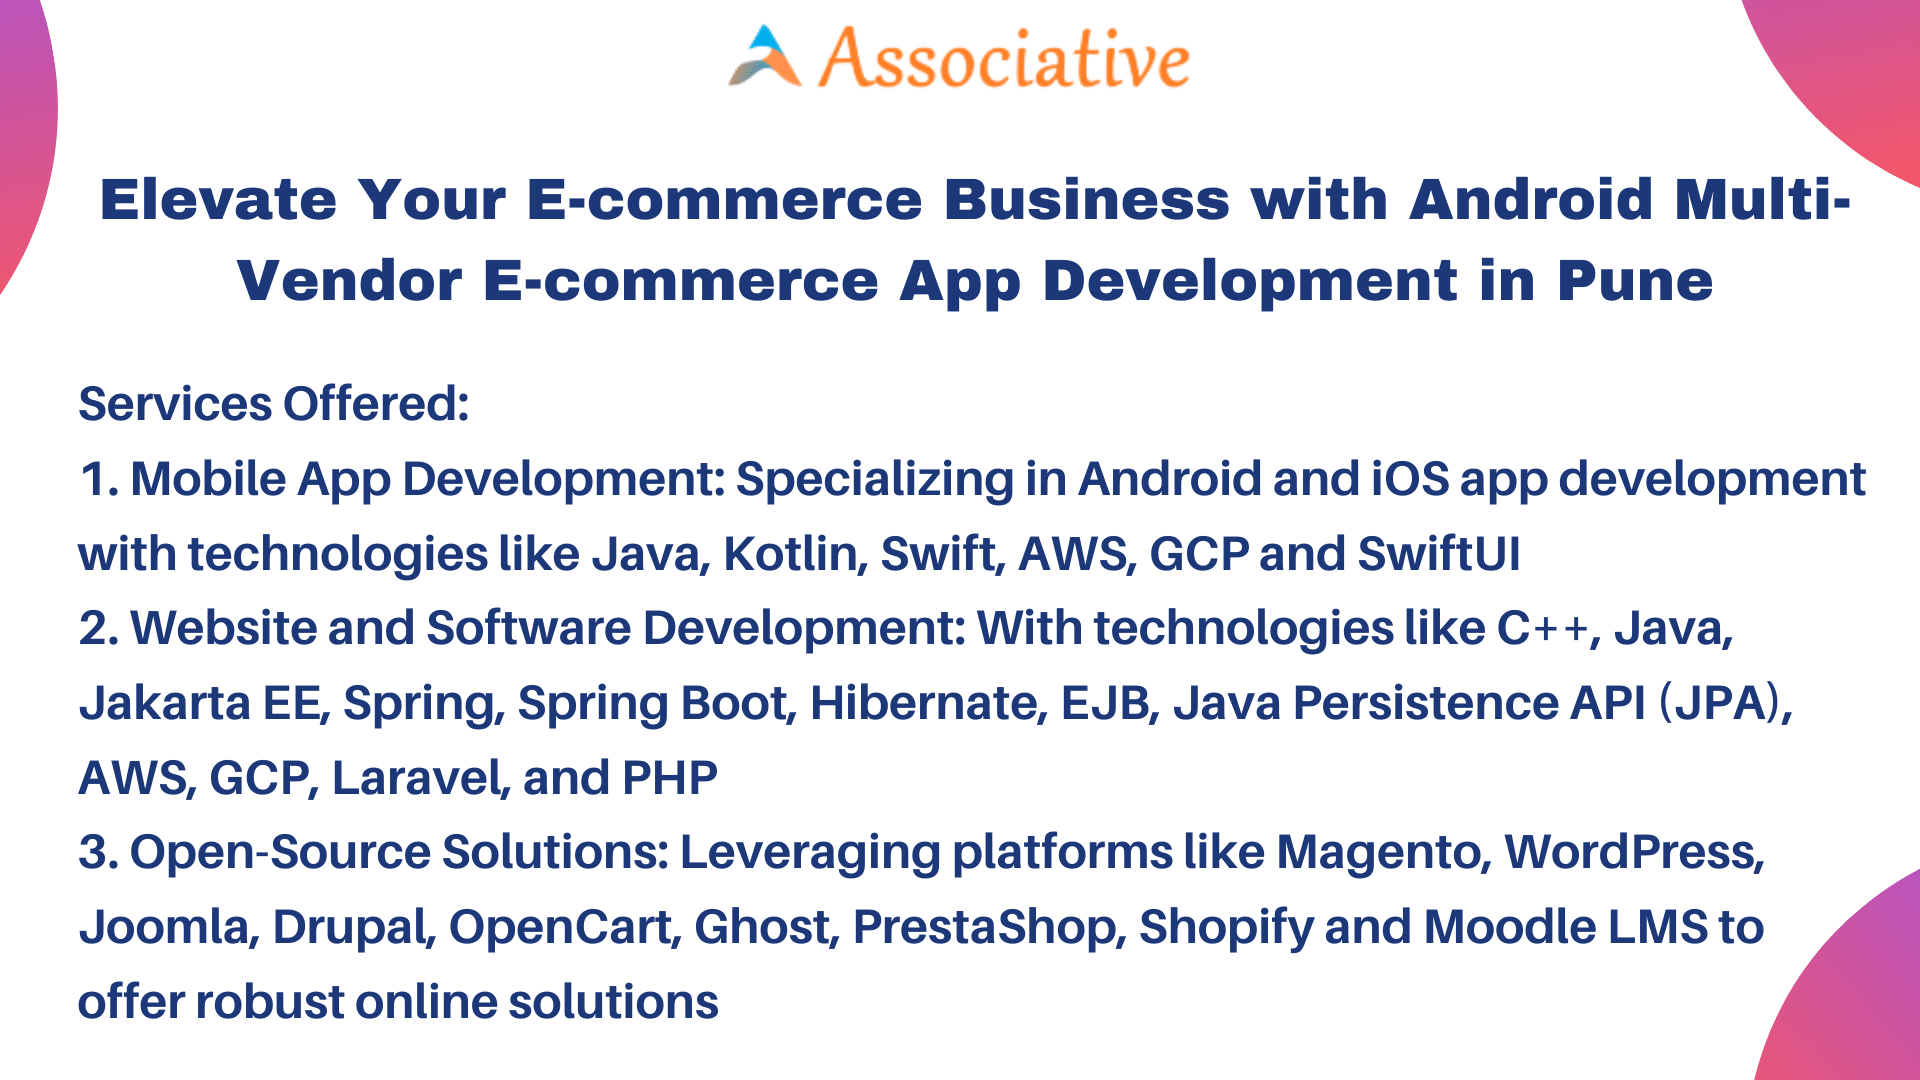 Elevate Your E-commerce Business with Android Multi-Vendor E-commerce App Development in Pune